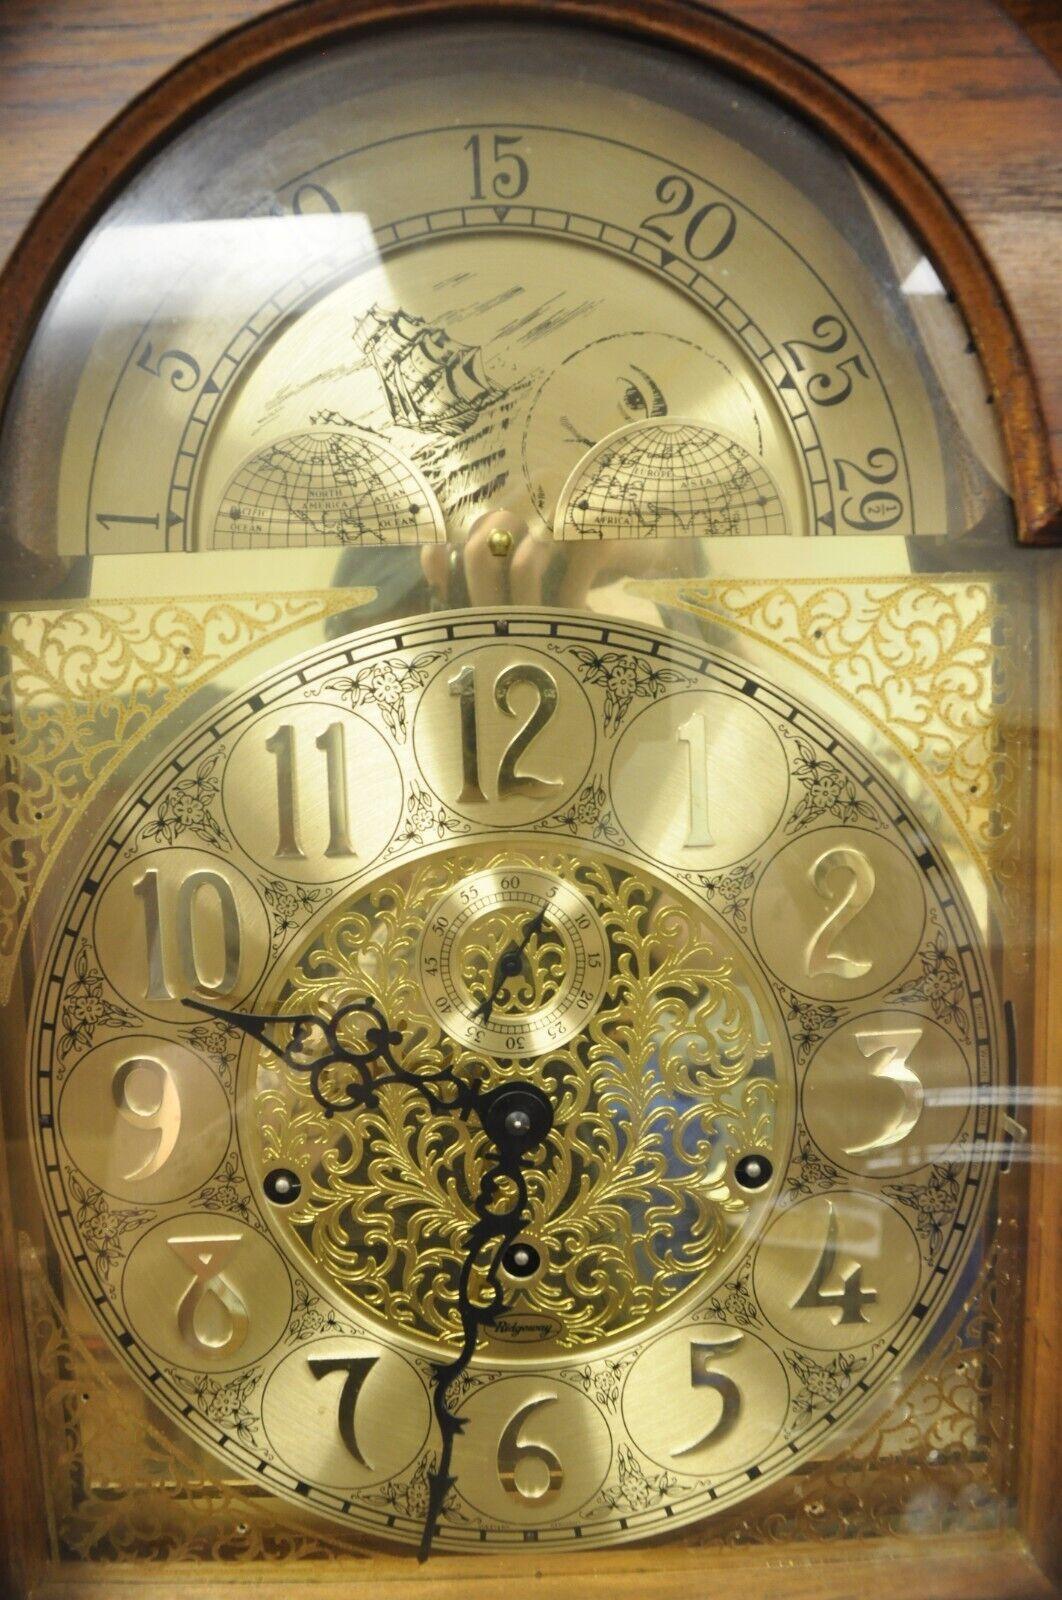 used grandfather clocks for sale near me